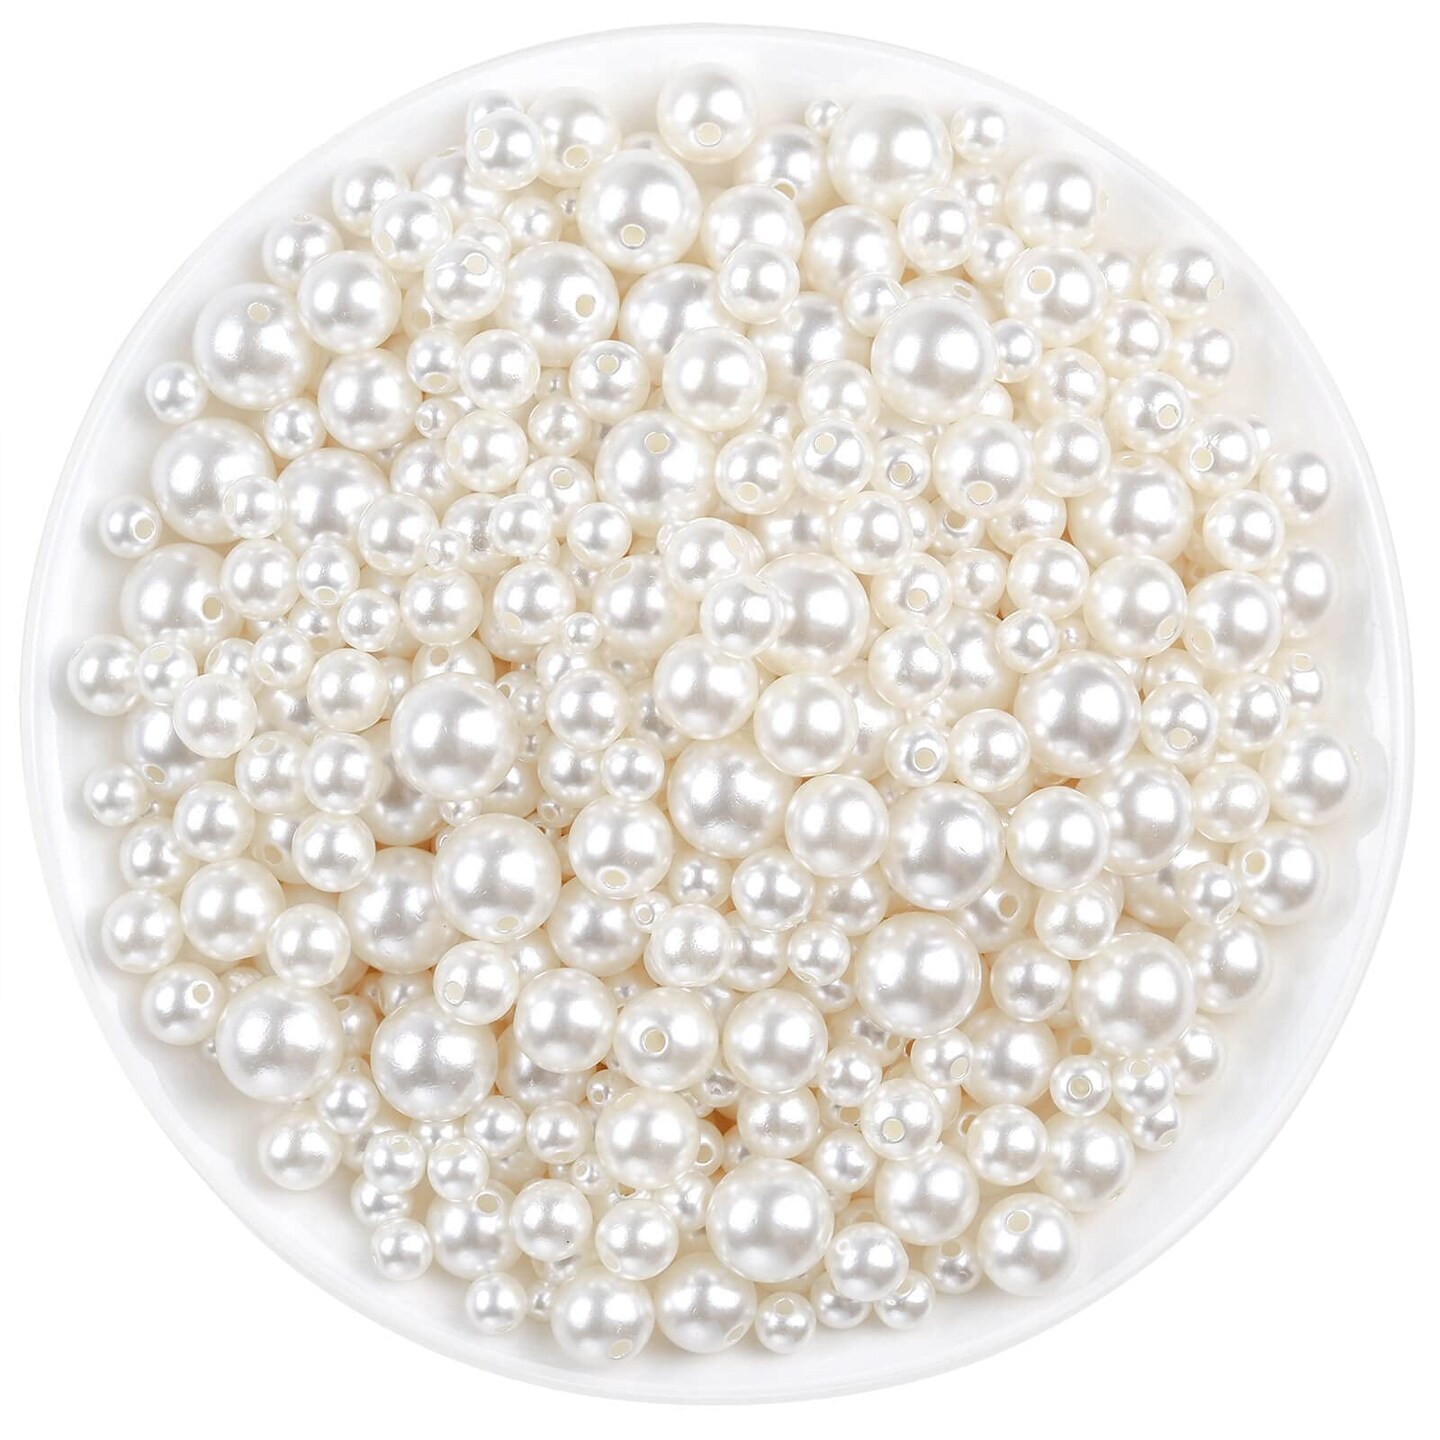 Pearl Beads, Anezus 800pcs Ivory Pearl Craft Beads Loose Pearls for Jewelry Making, Crafts, Decoration and Vase Filler (Assorted Sizes)